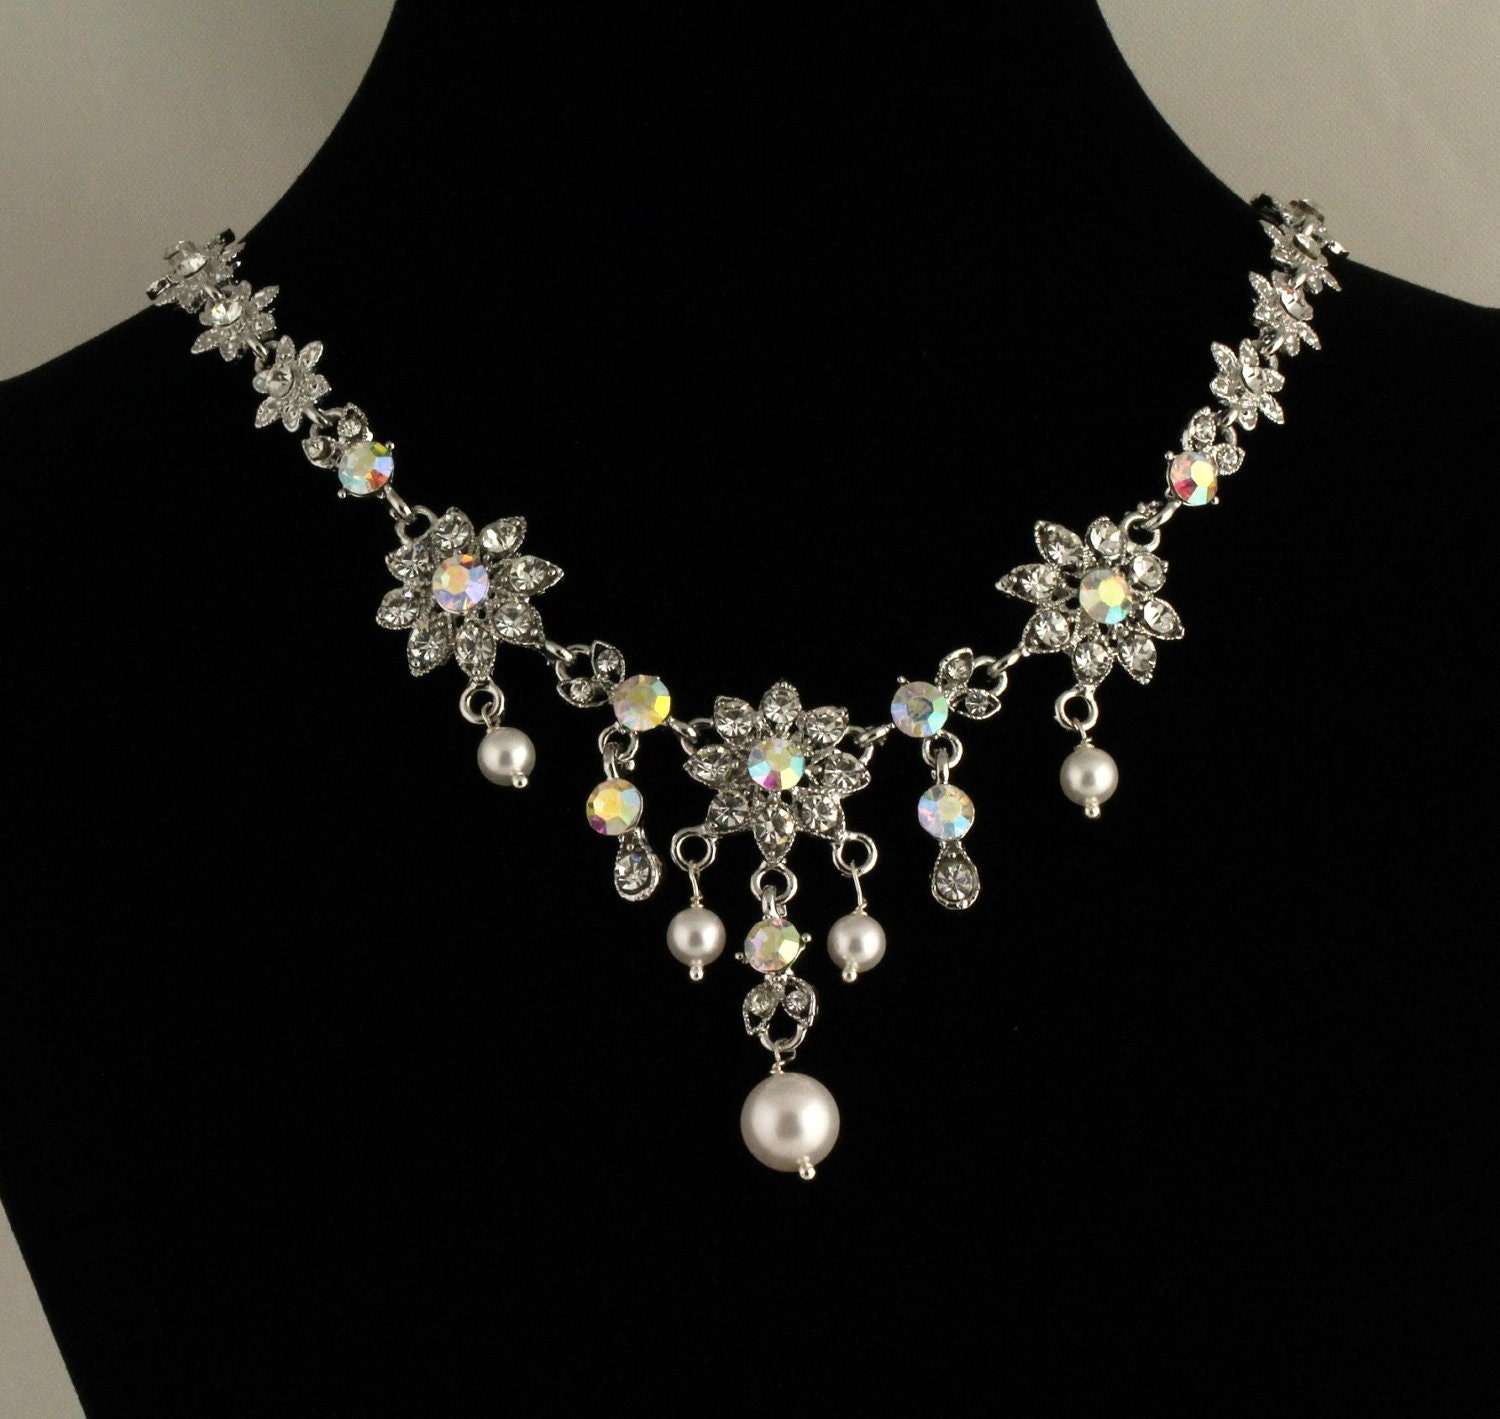 Bridal Rhinestone And Pearl Necklace. Listing 82769796